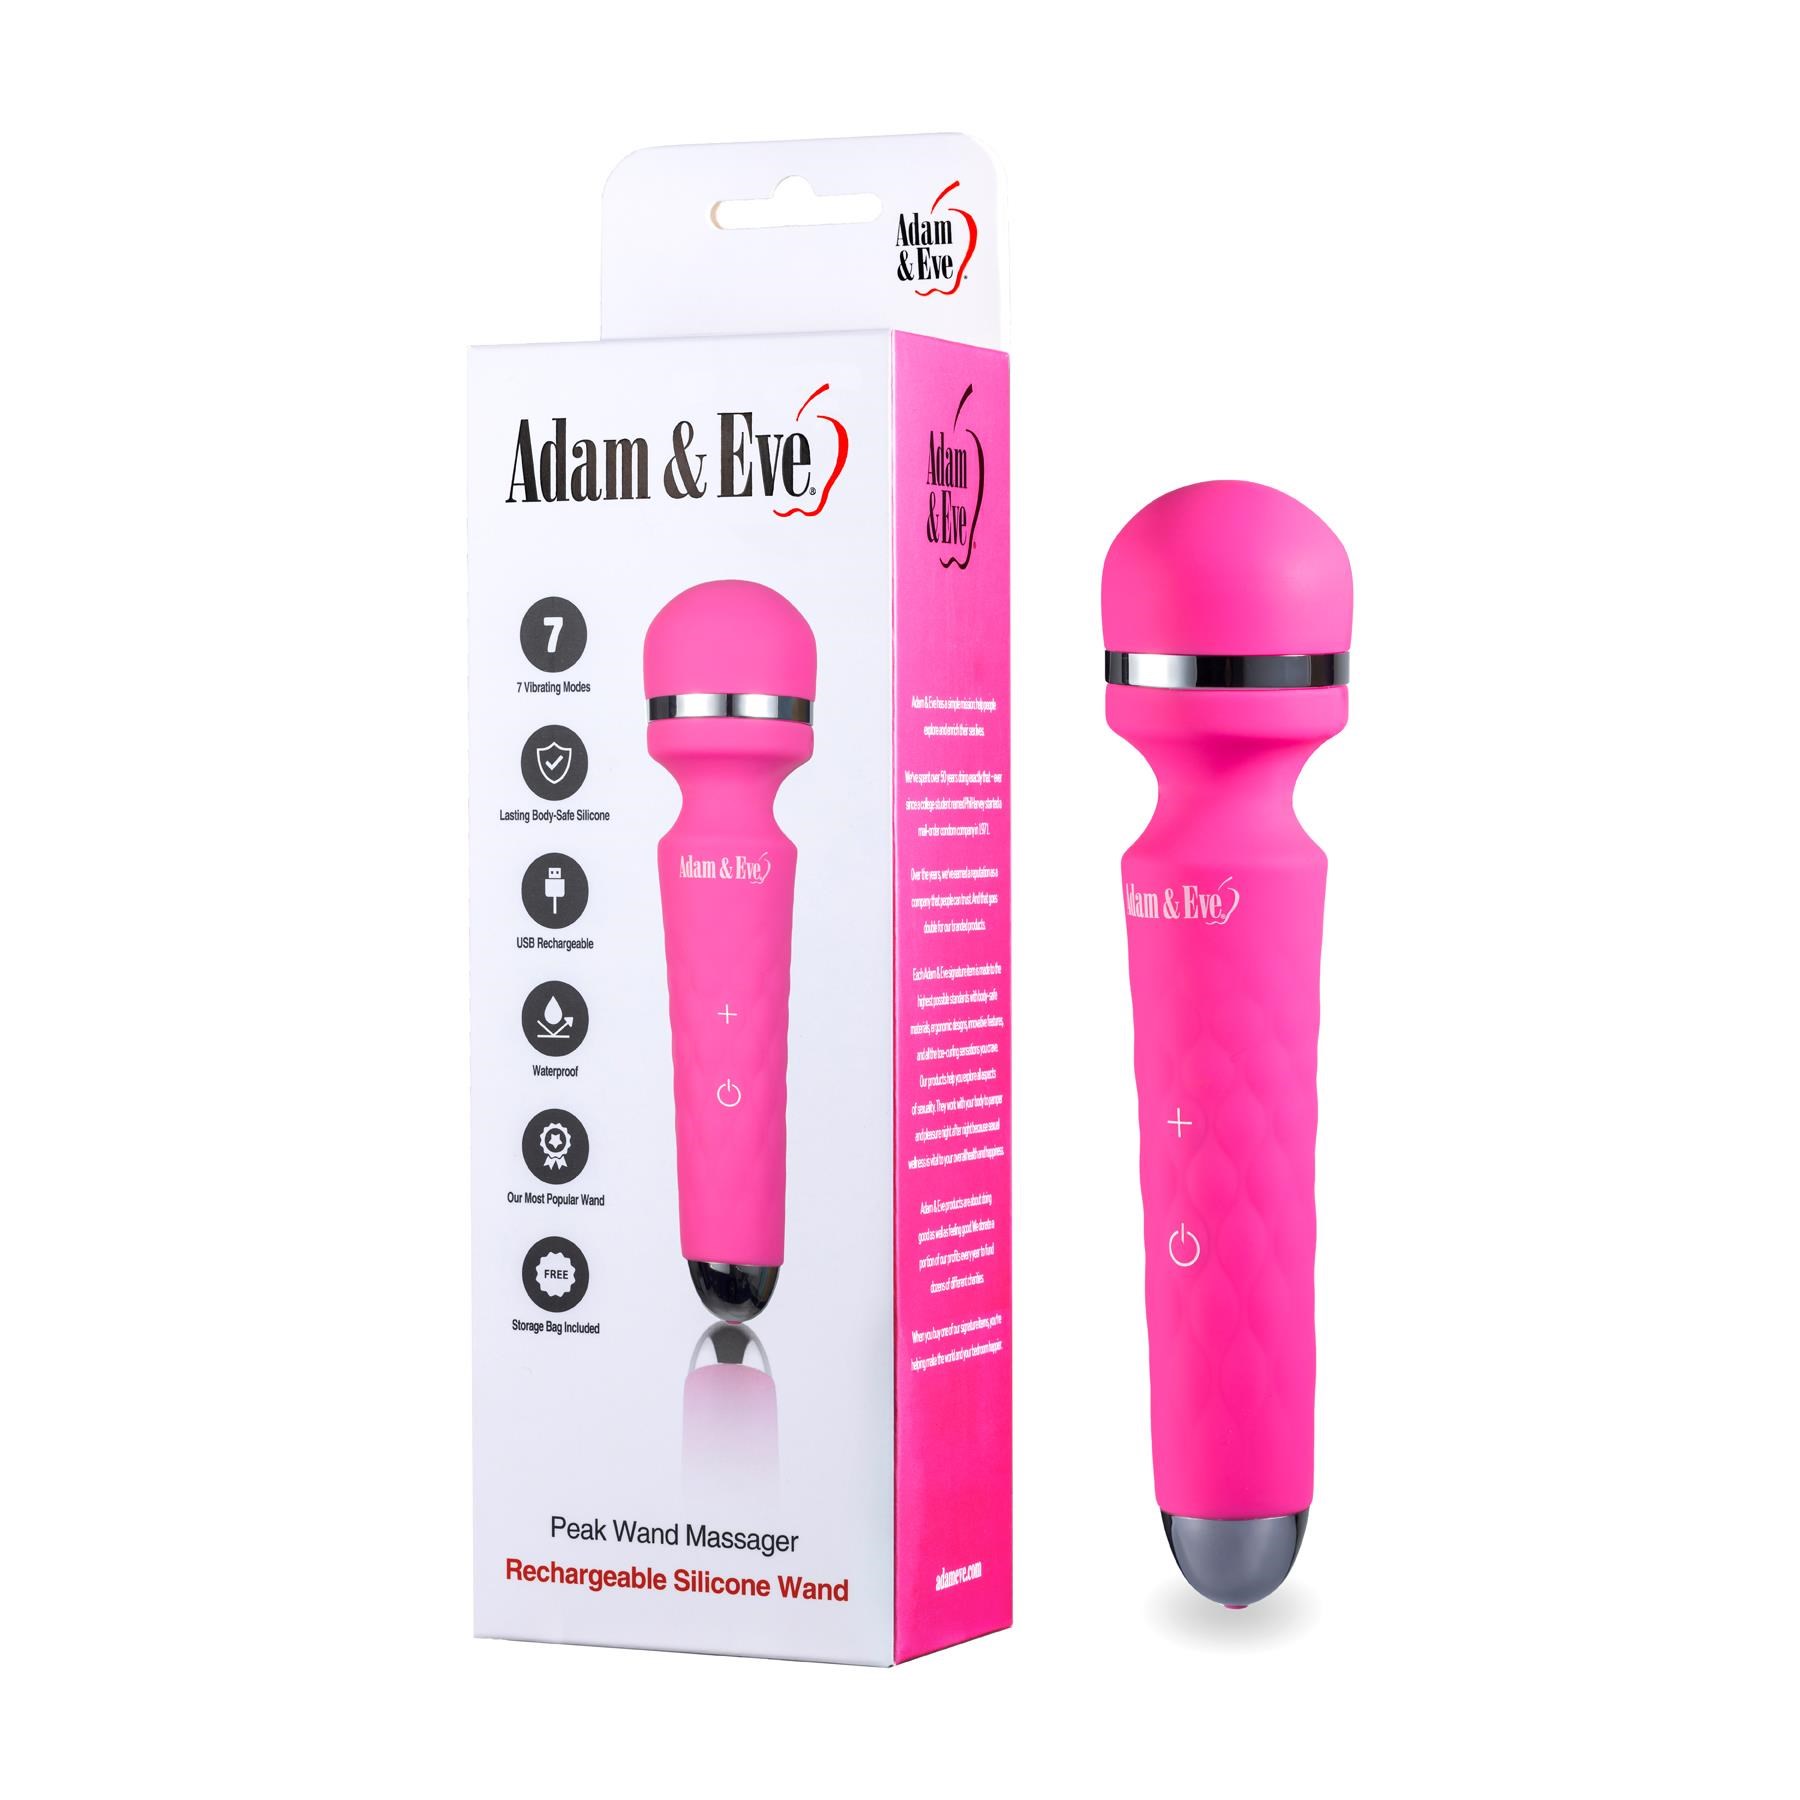 Adam & Eve Peak Wand Massager - Product and Packaging